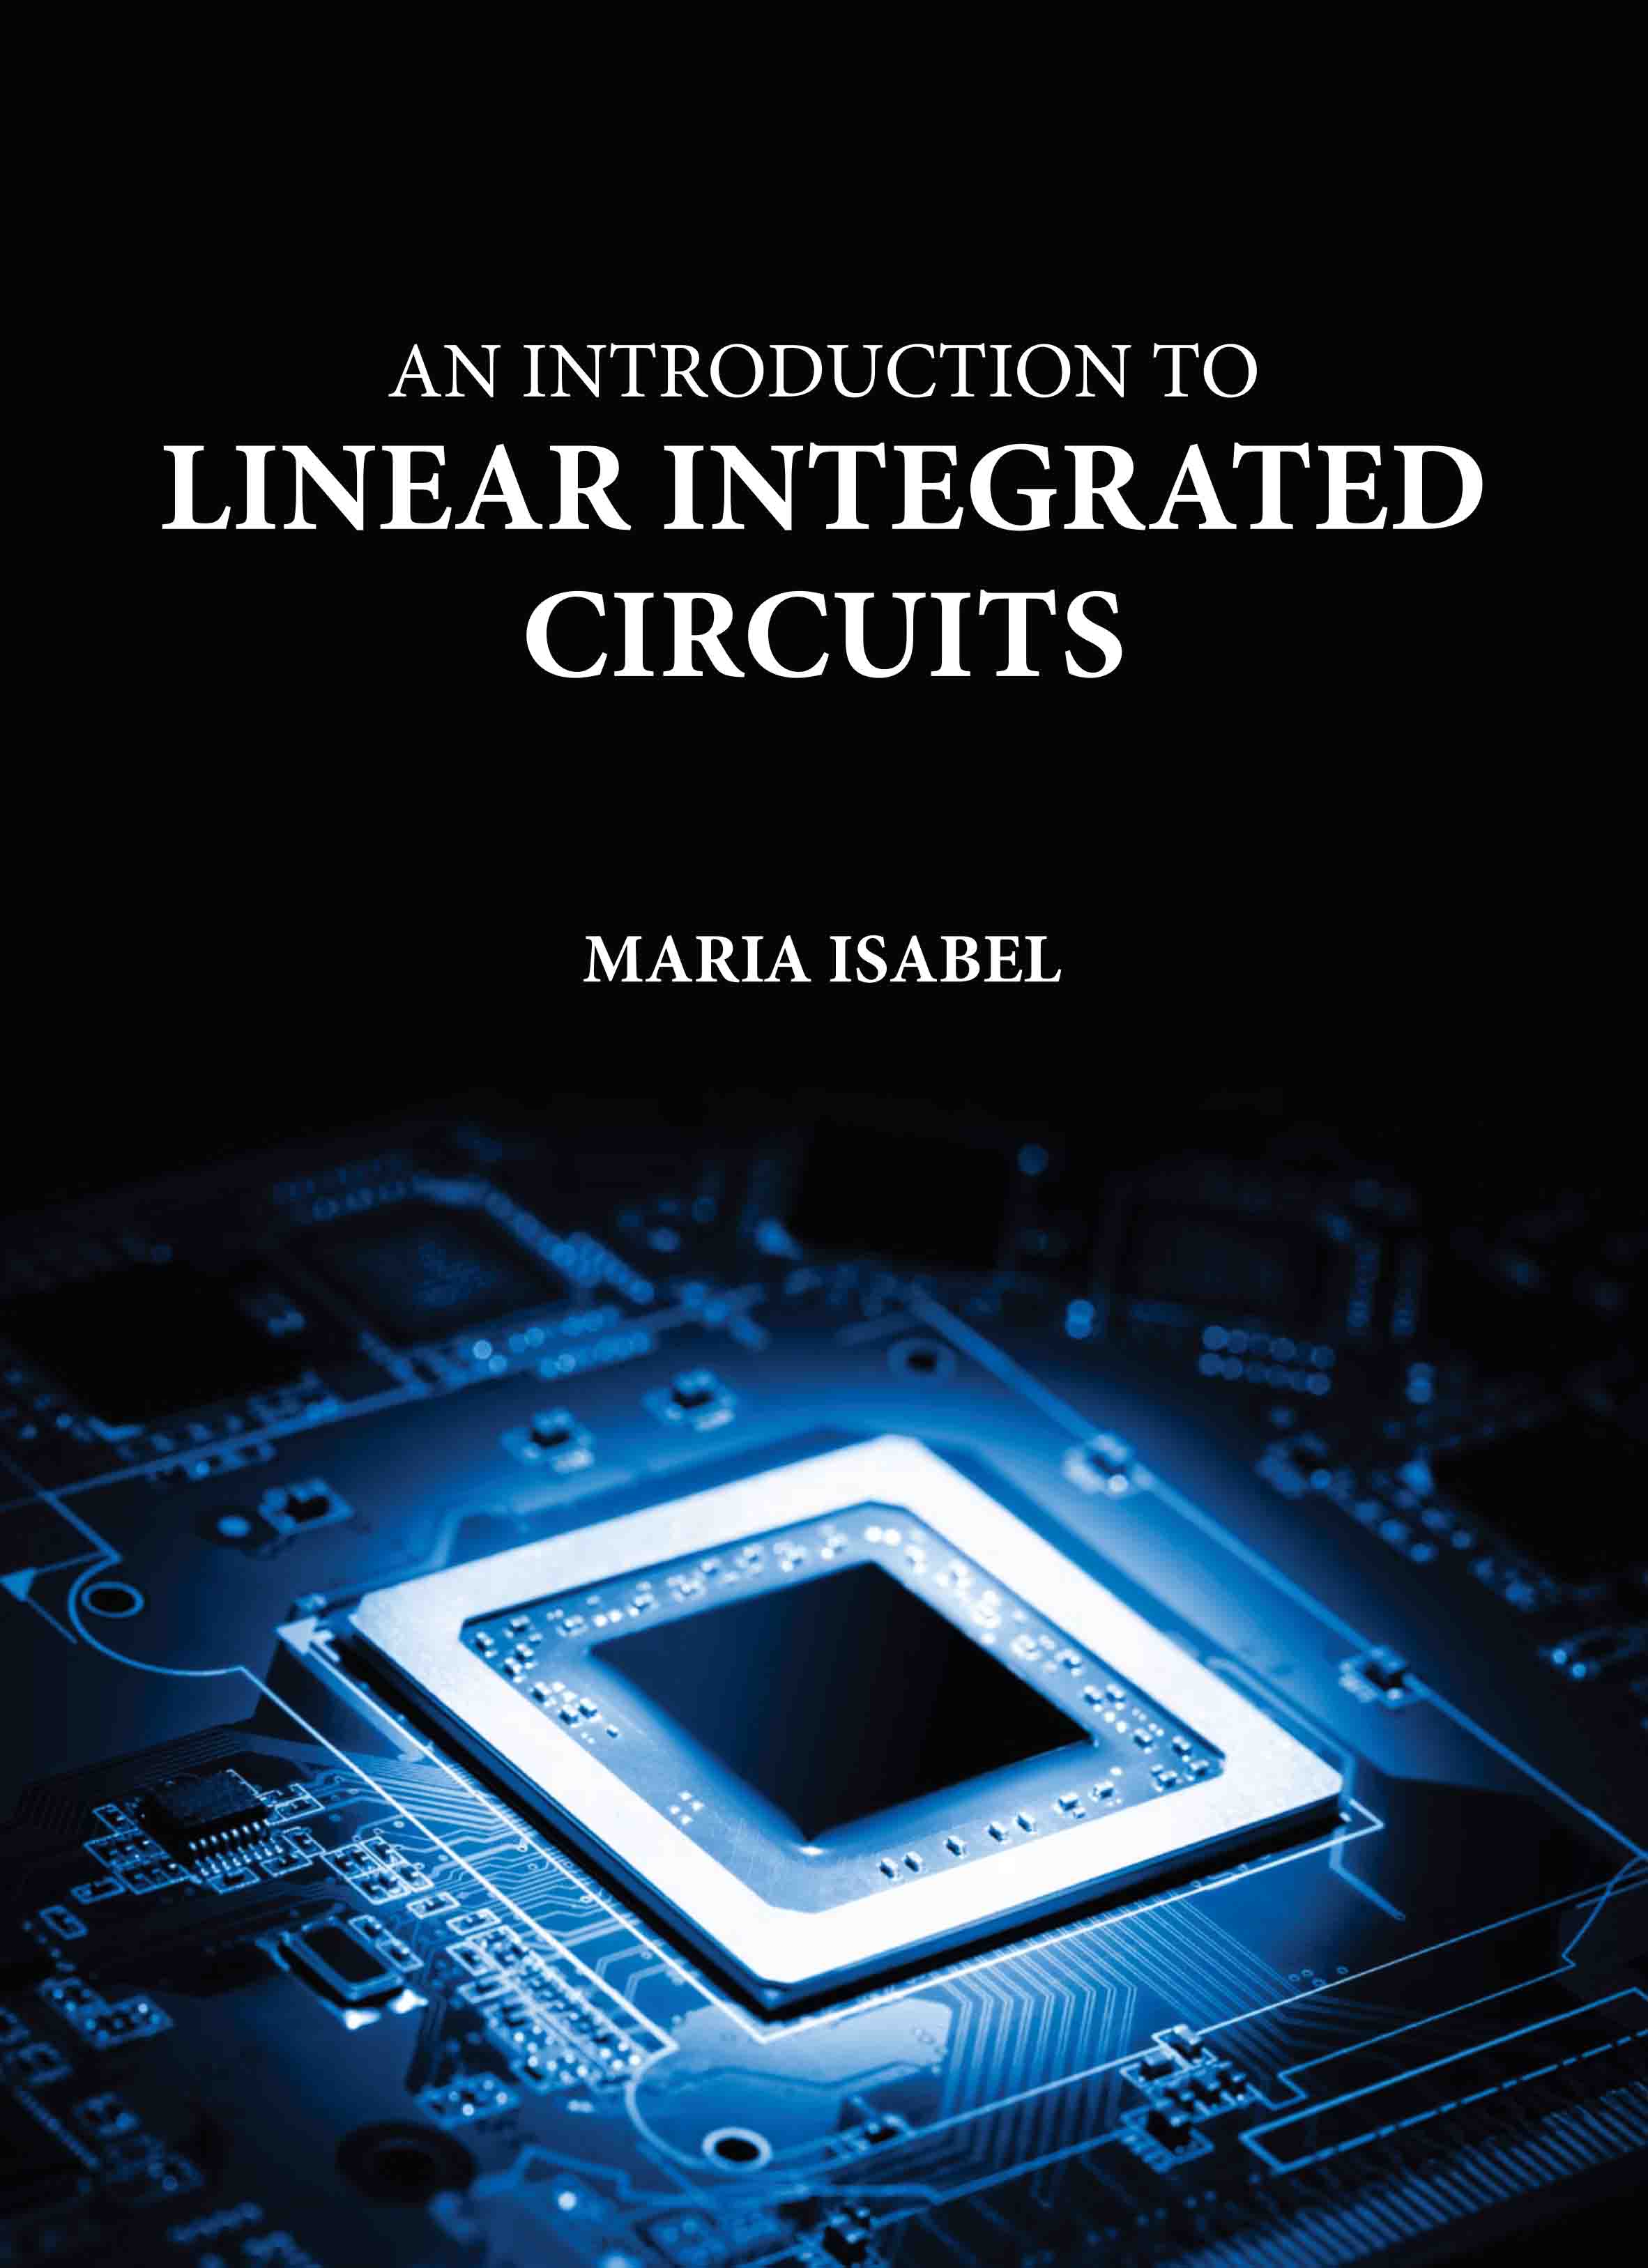 An Introduction to Linear Integrated Circuits